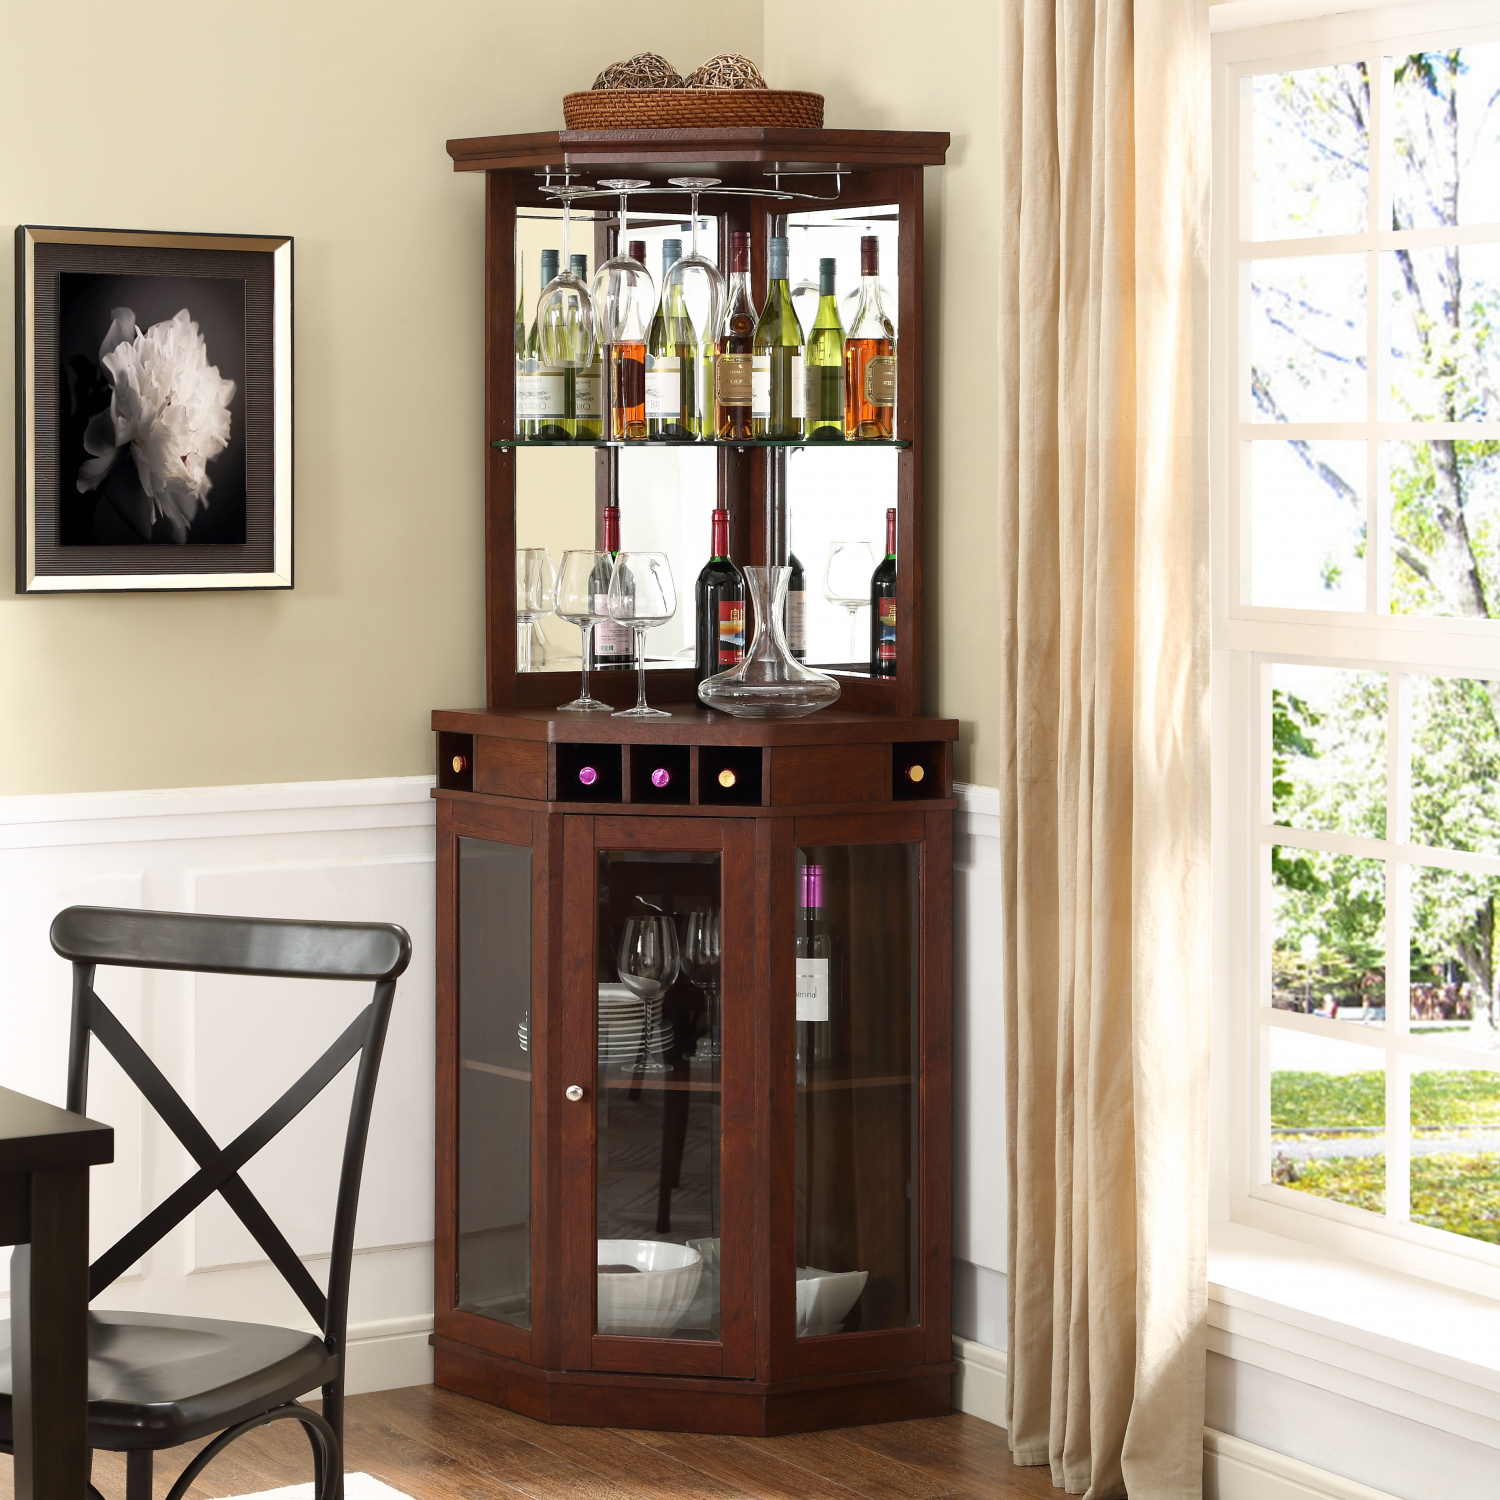 Details About Mini Bars Liquor Cabinet Whiskey Cabinets Wine Storage Wooden Home Bar Furniture inside sizing 1500 X 1500